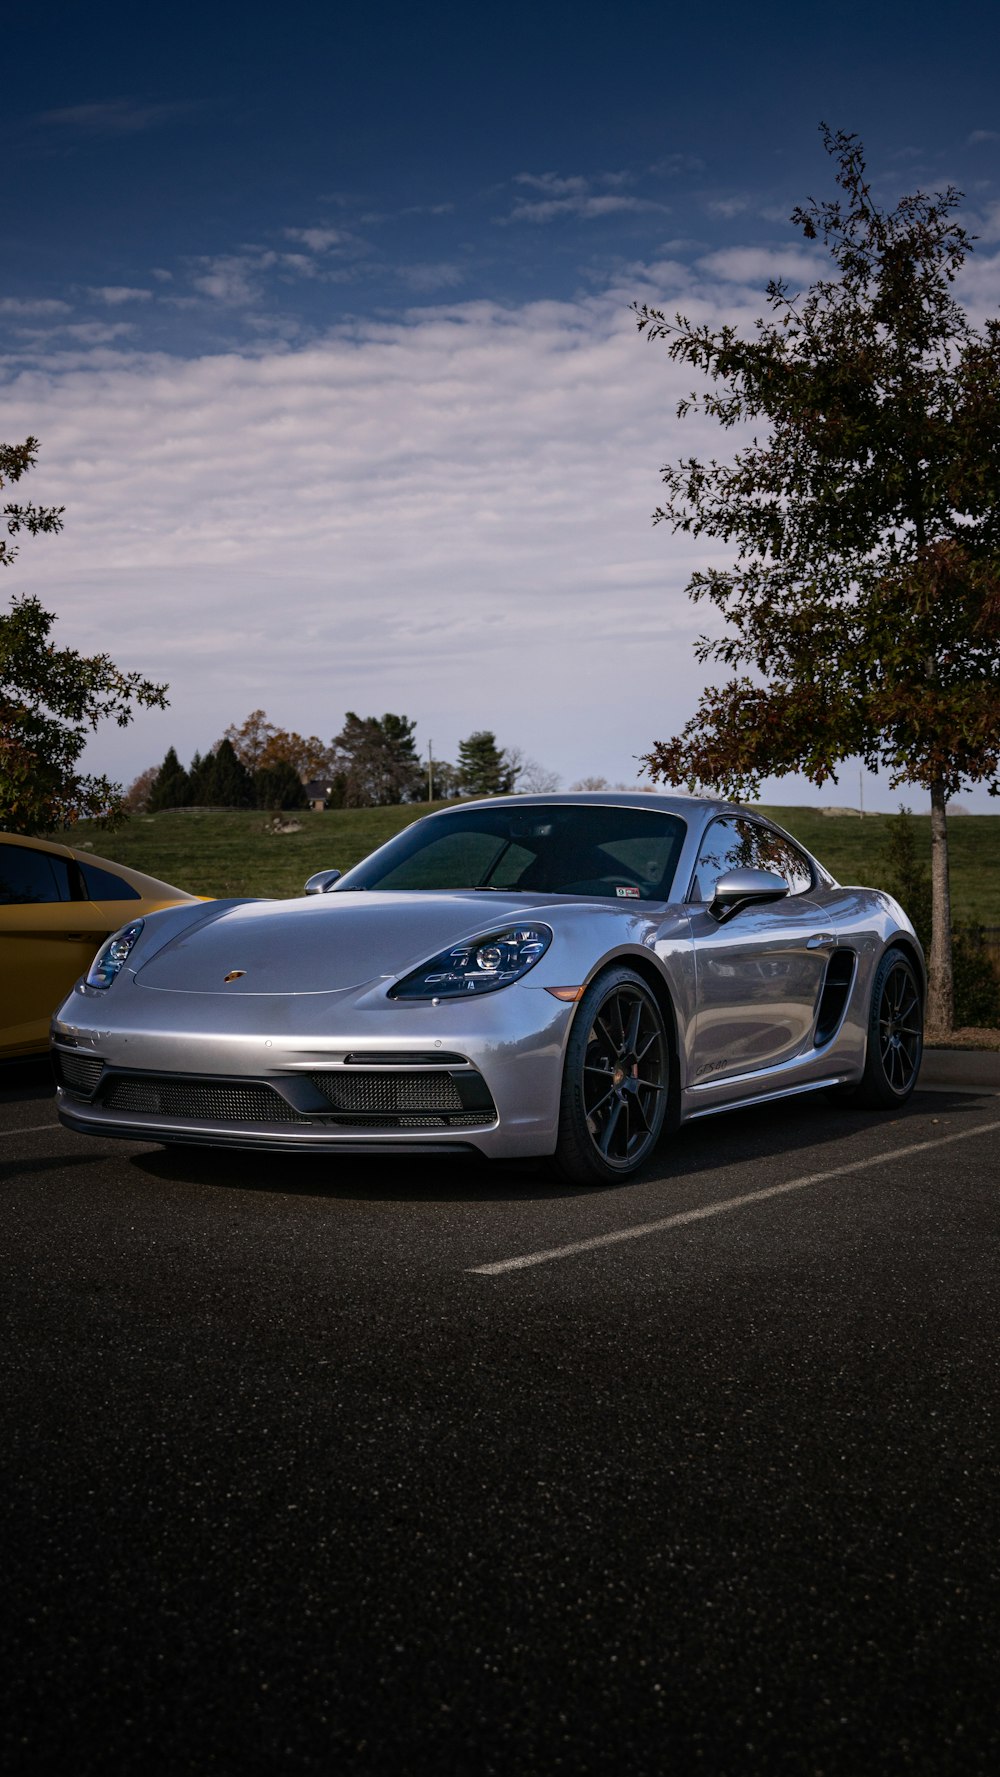 a silver sports car parked in a parking lot